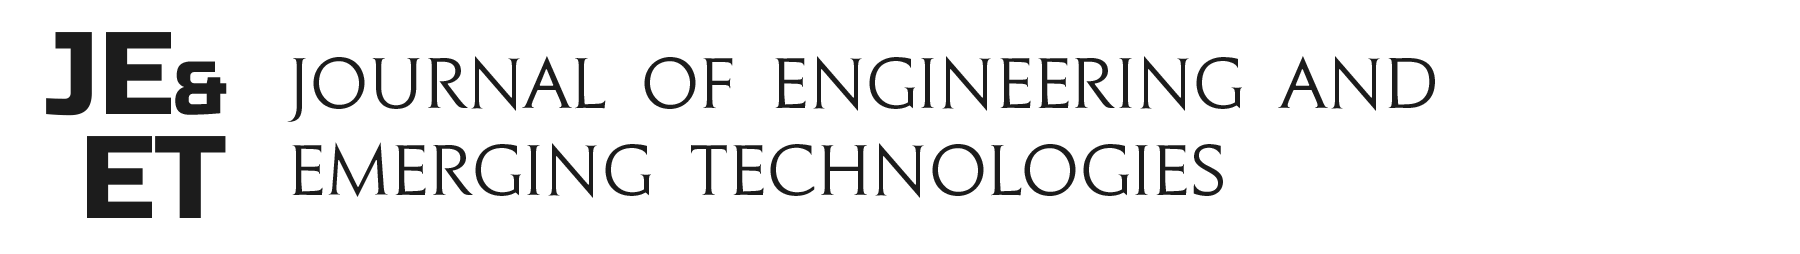 Journal of Engineering and Emerging Technologies